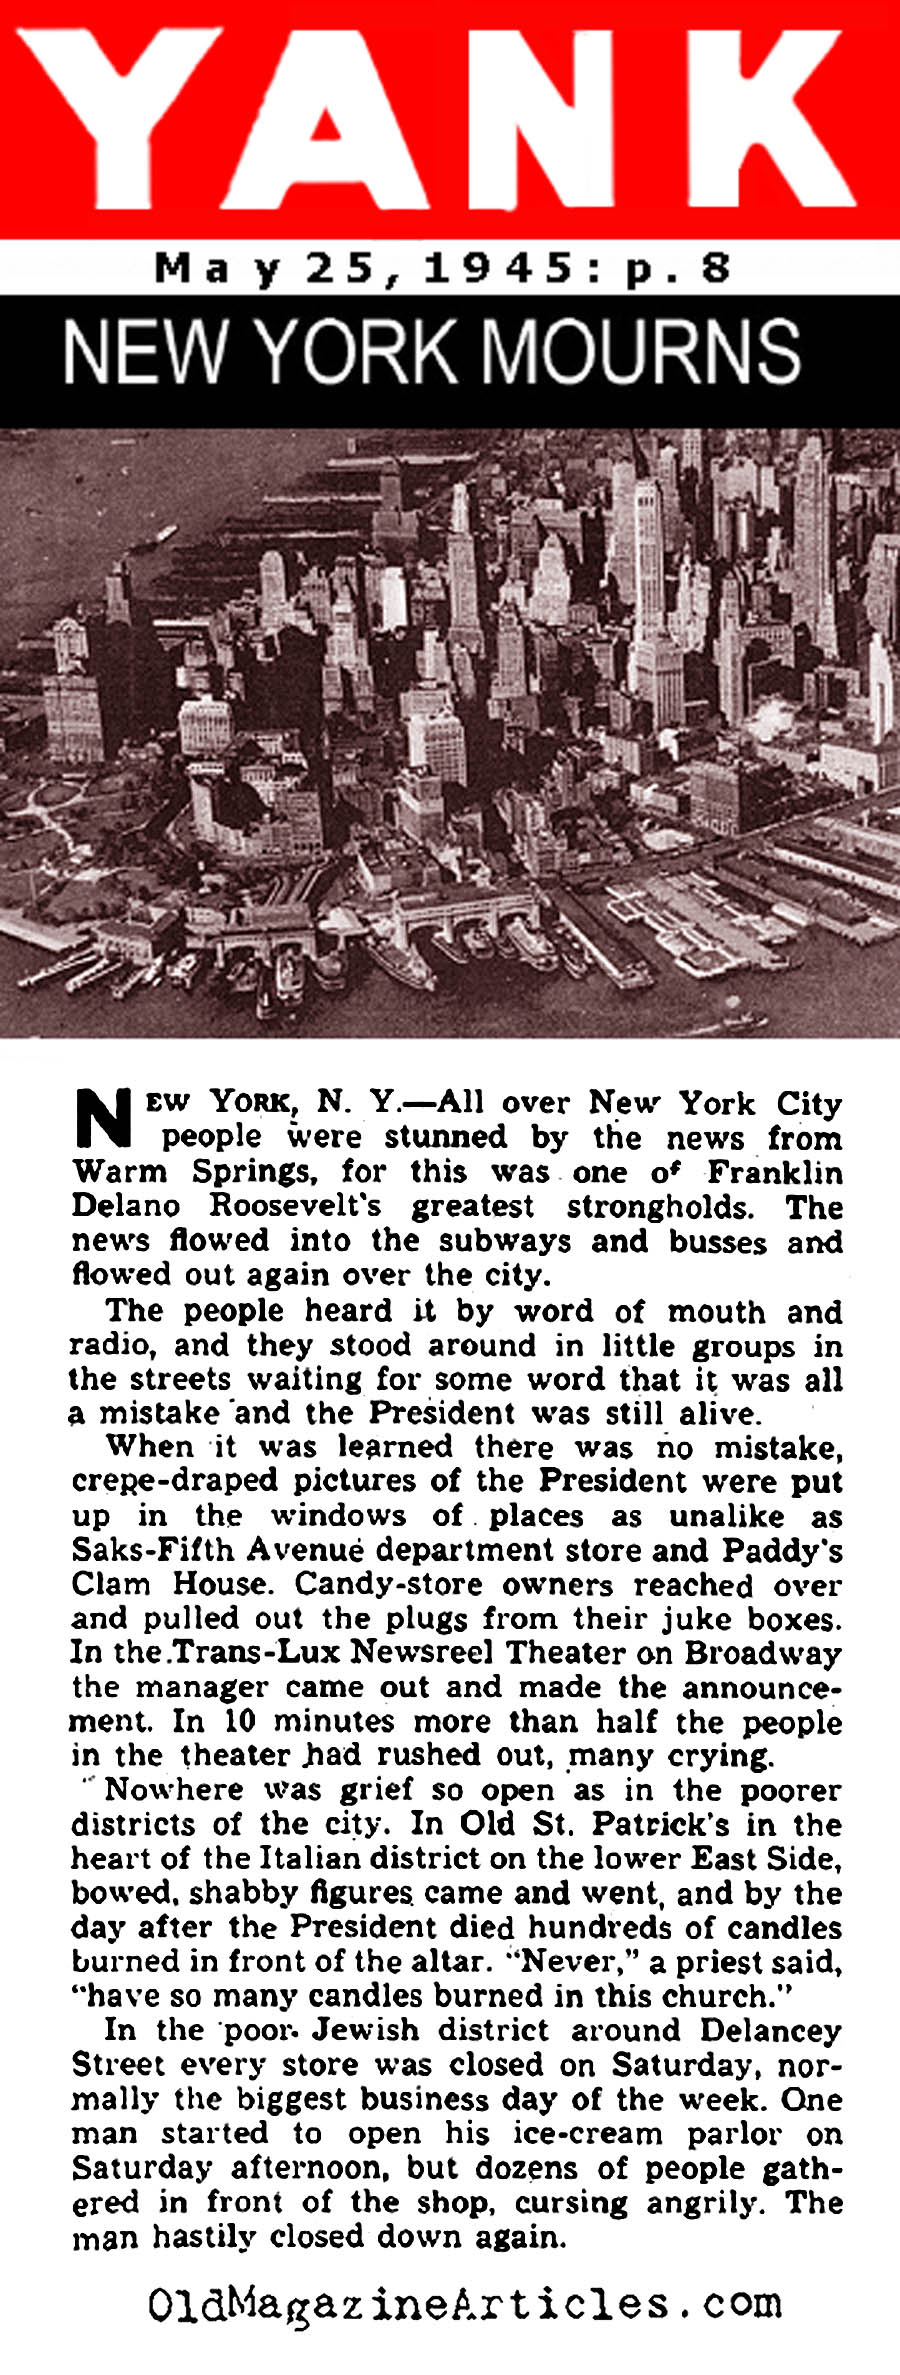 When New York City Mourned F.D.R. (Yank Magazine, 1945)